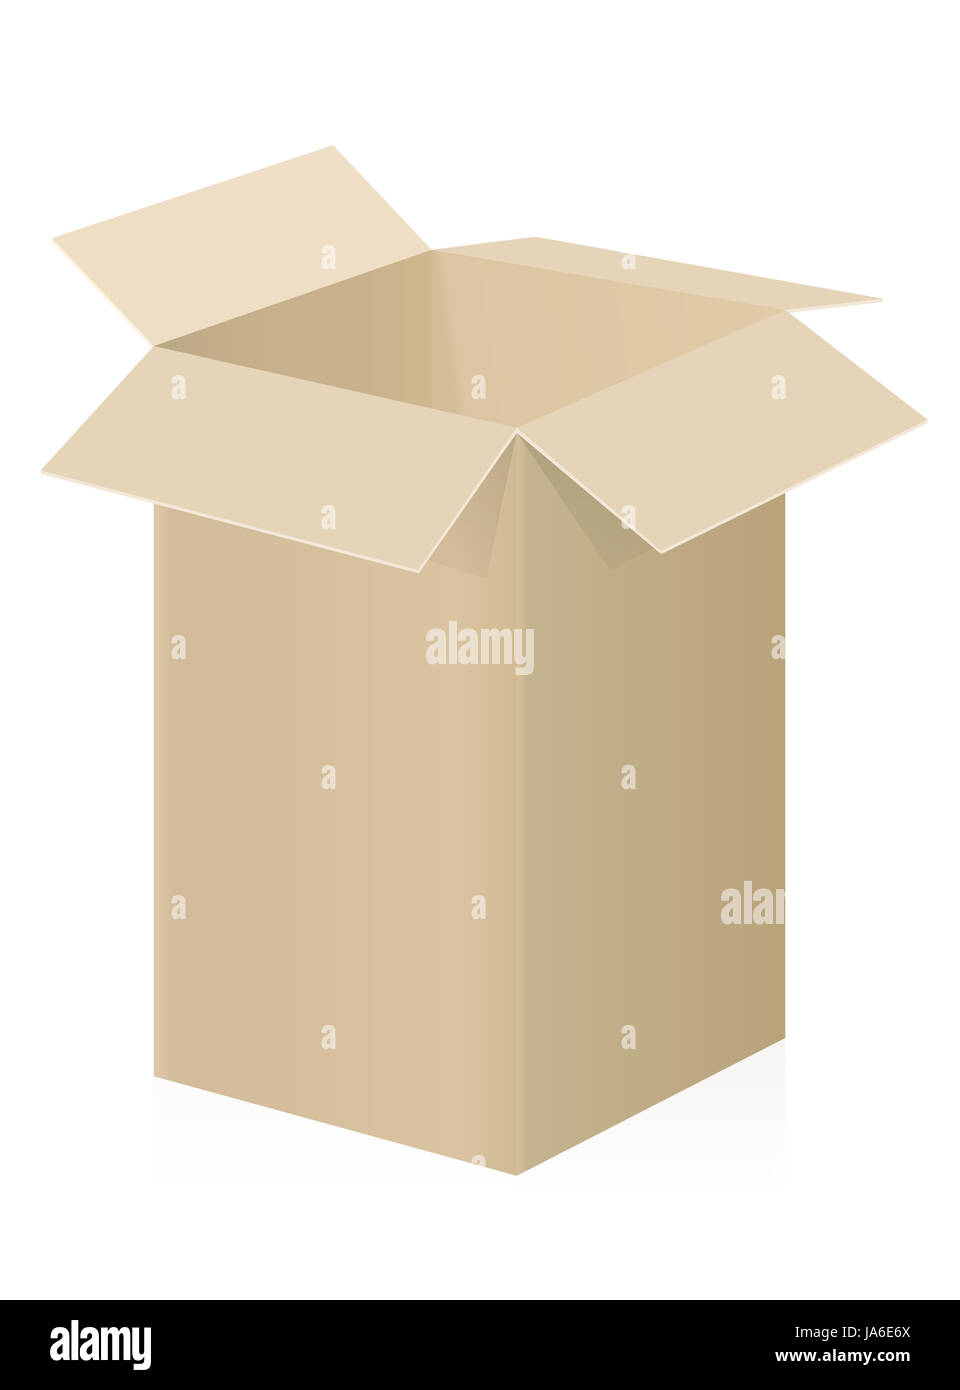 Big box - upright parcel or container with open top for mail, deliver or shipping- three-dimensional illustration on white background. Stock Photo